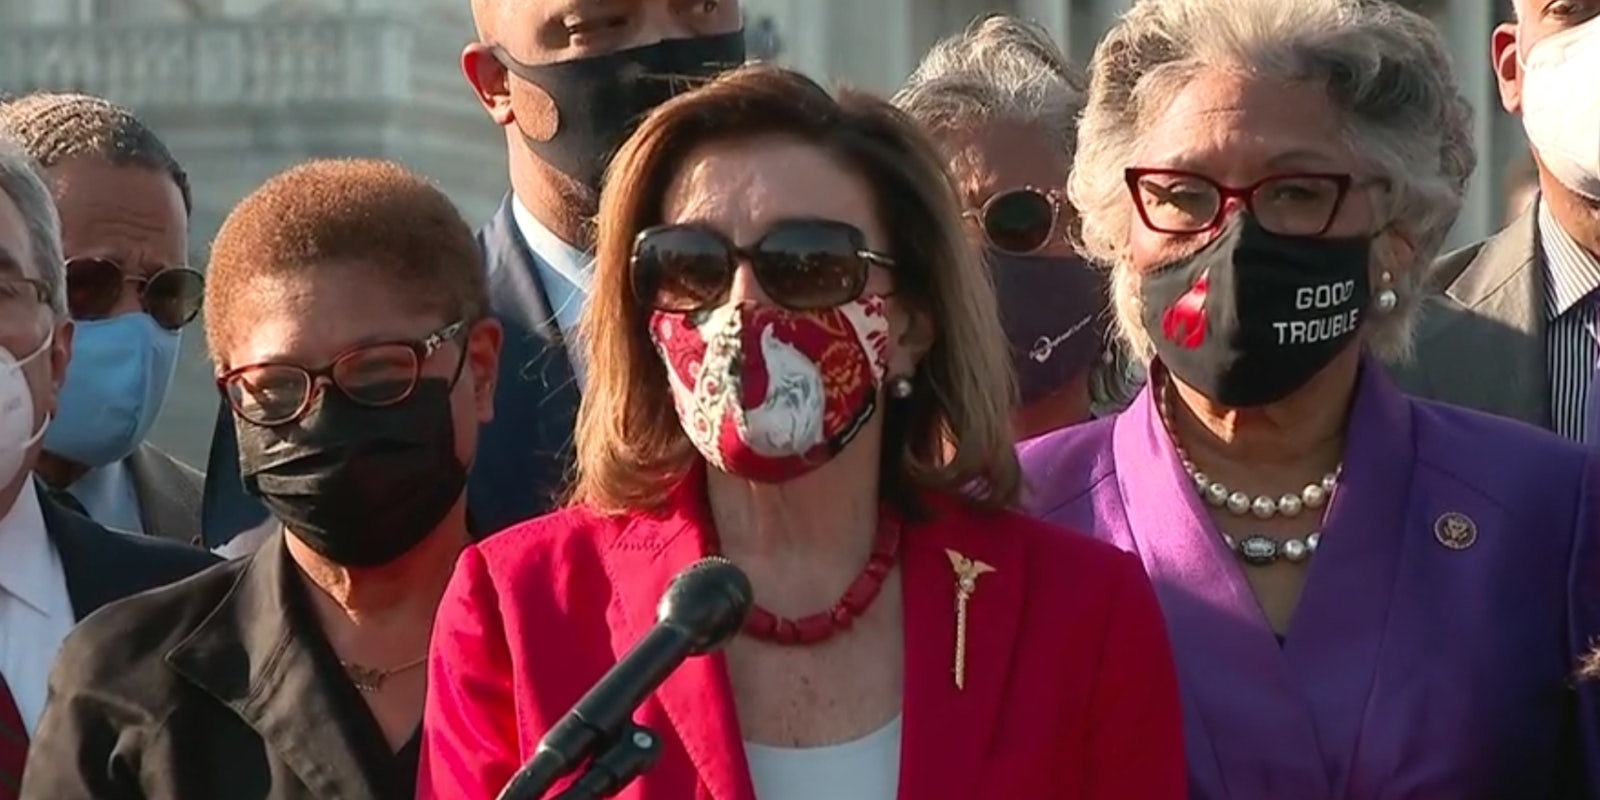 Nancy Pelosi speaks at a press conference to react to the Derek Chauvin trail.